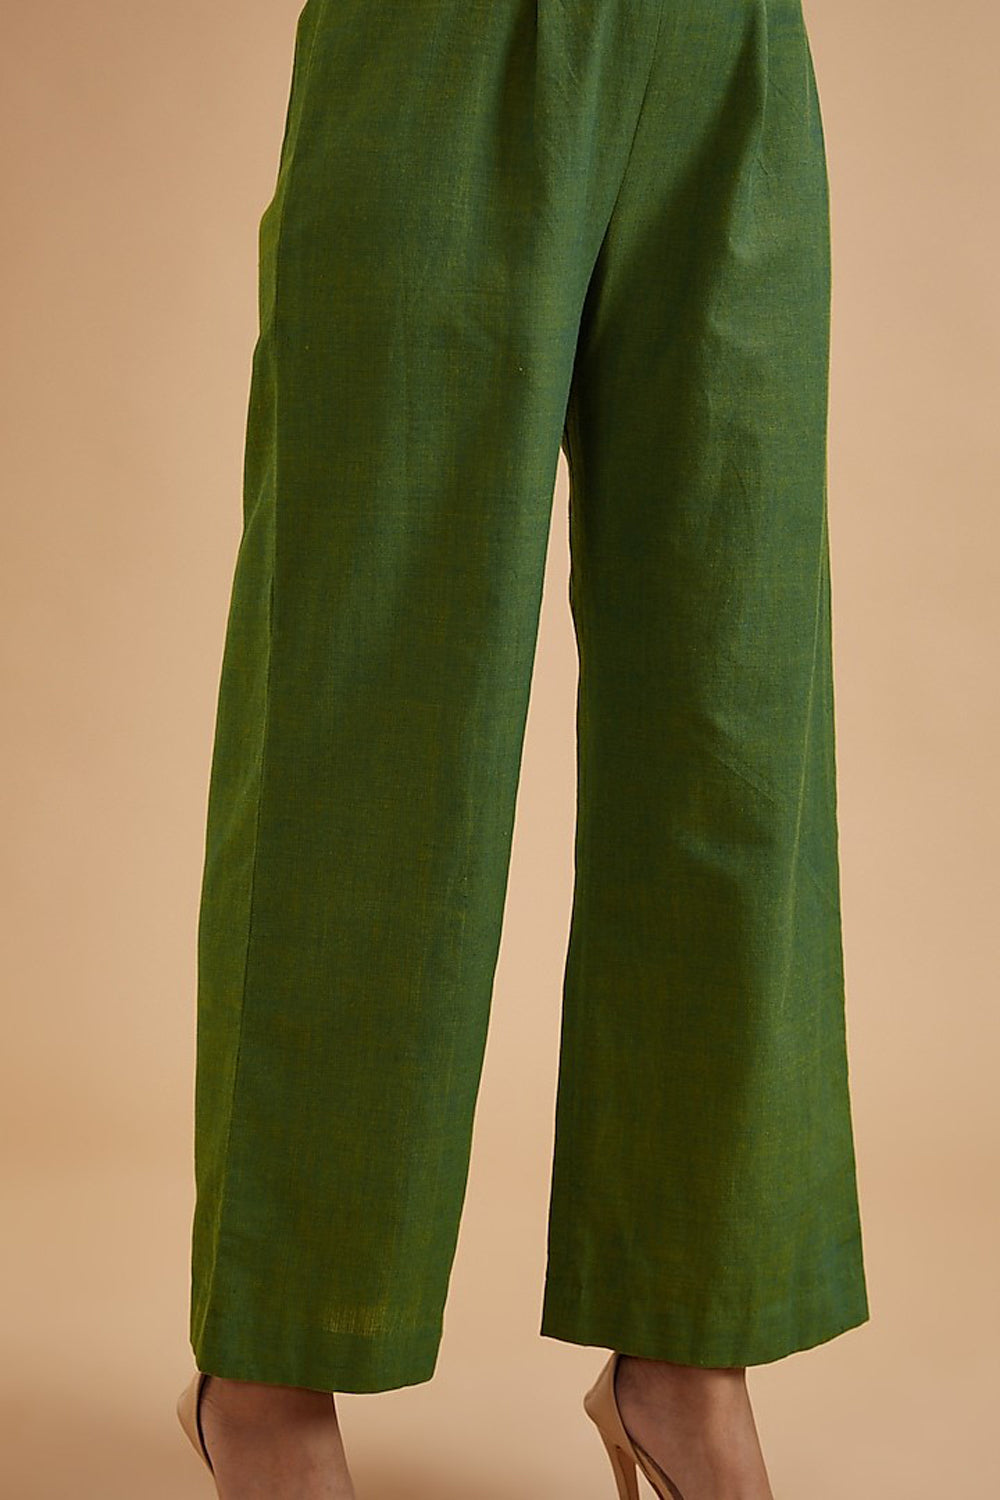 Green Handloom Cotton Solid Flared Pant